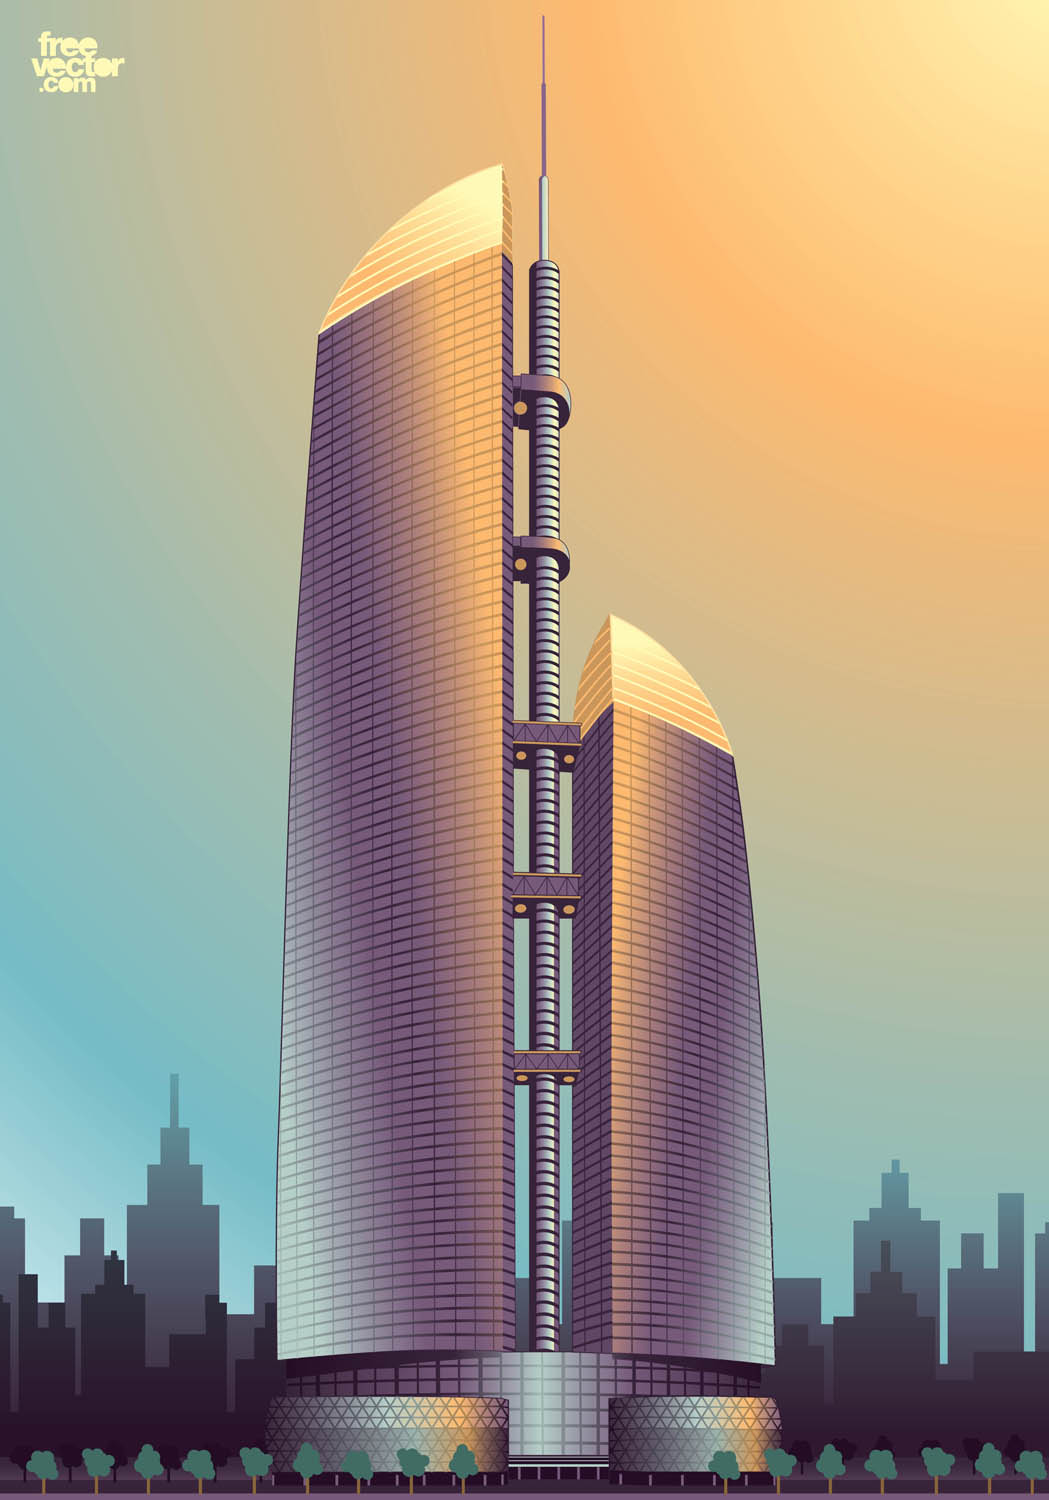 Federation Tower